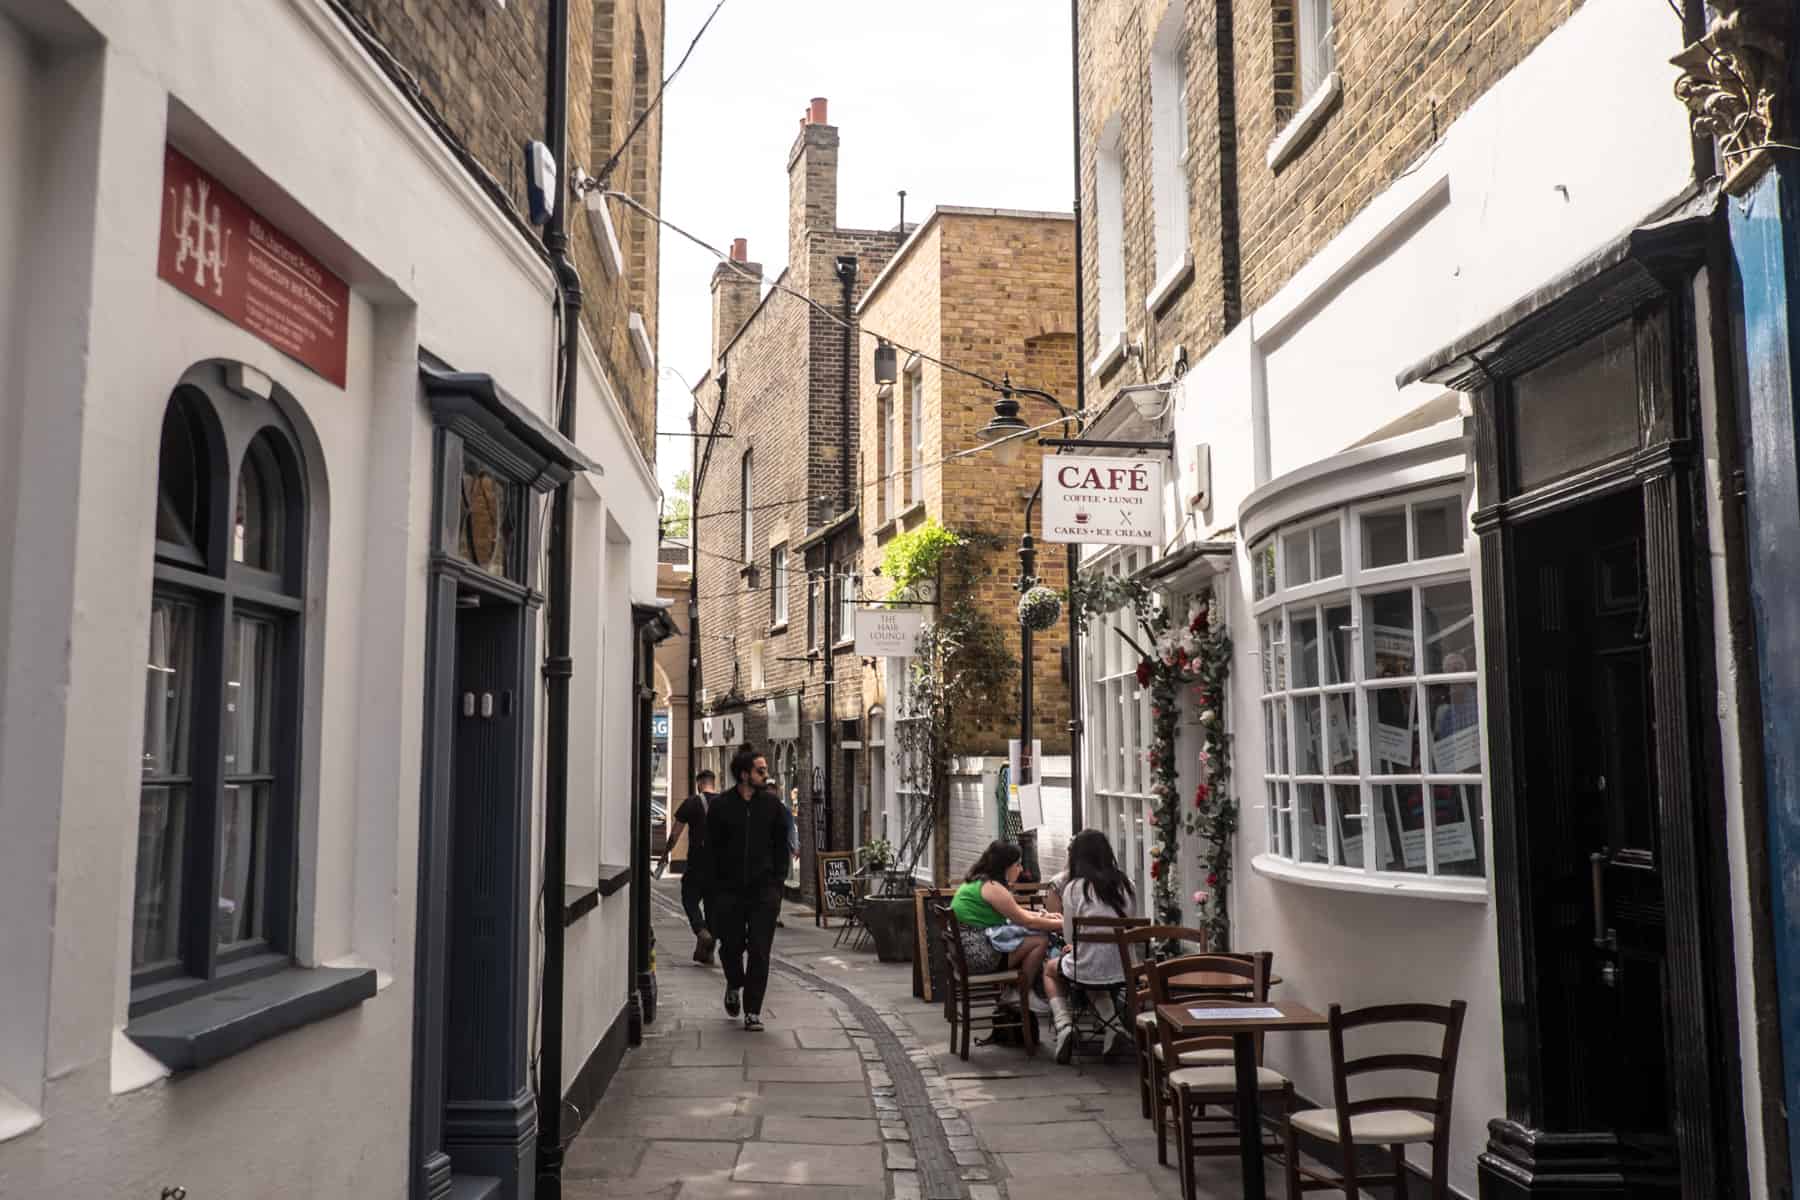 People walk through and sit outside a cafe on a narrow street in Greenwich with brick buildings and white shop fronts. 